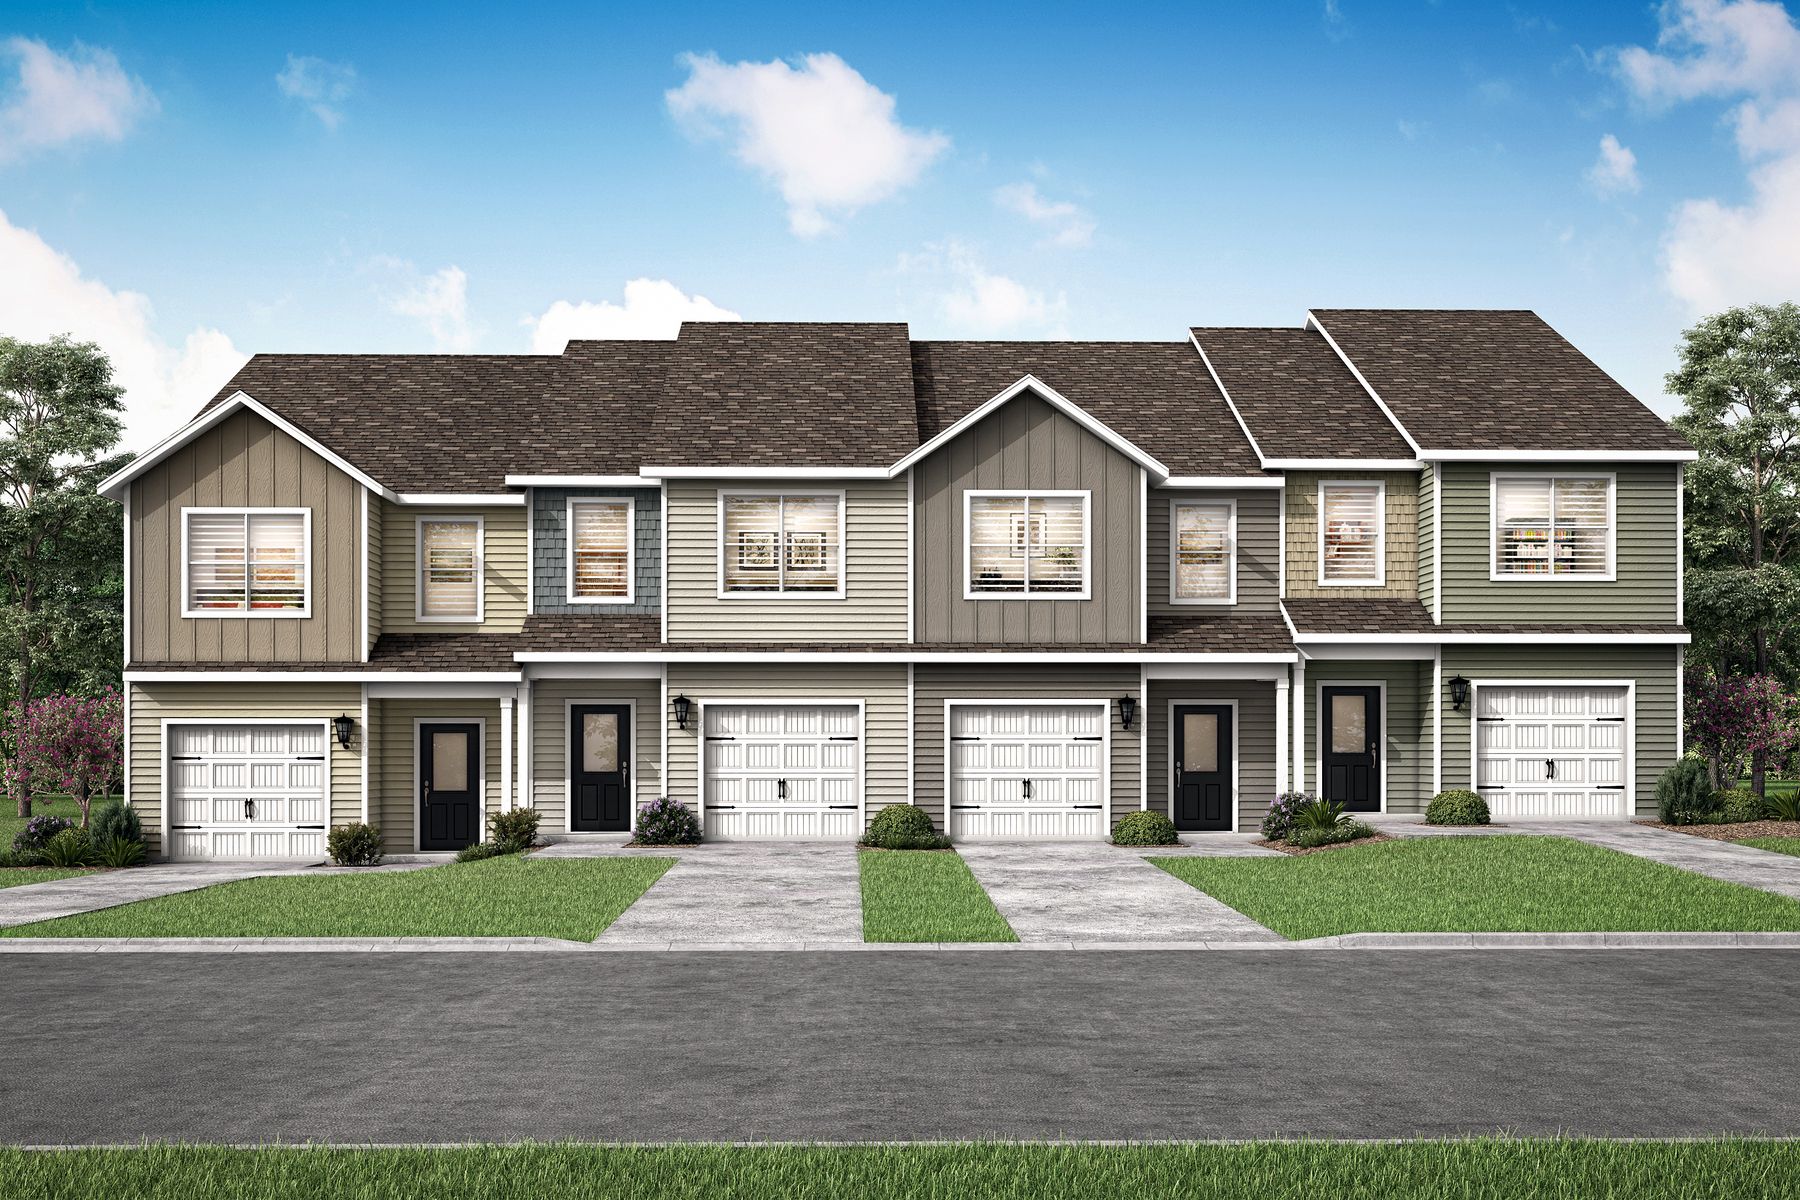 Homeplace at Riverside Townhomes:LGI Homes at Homeplace at Riverside